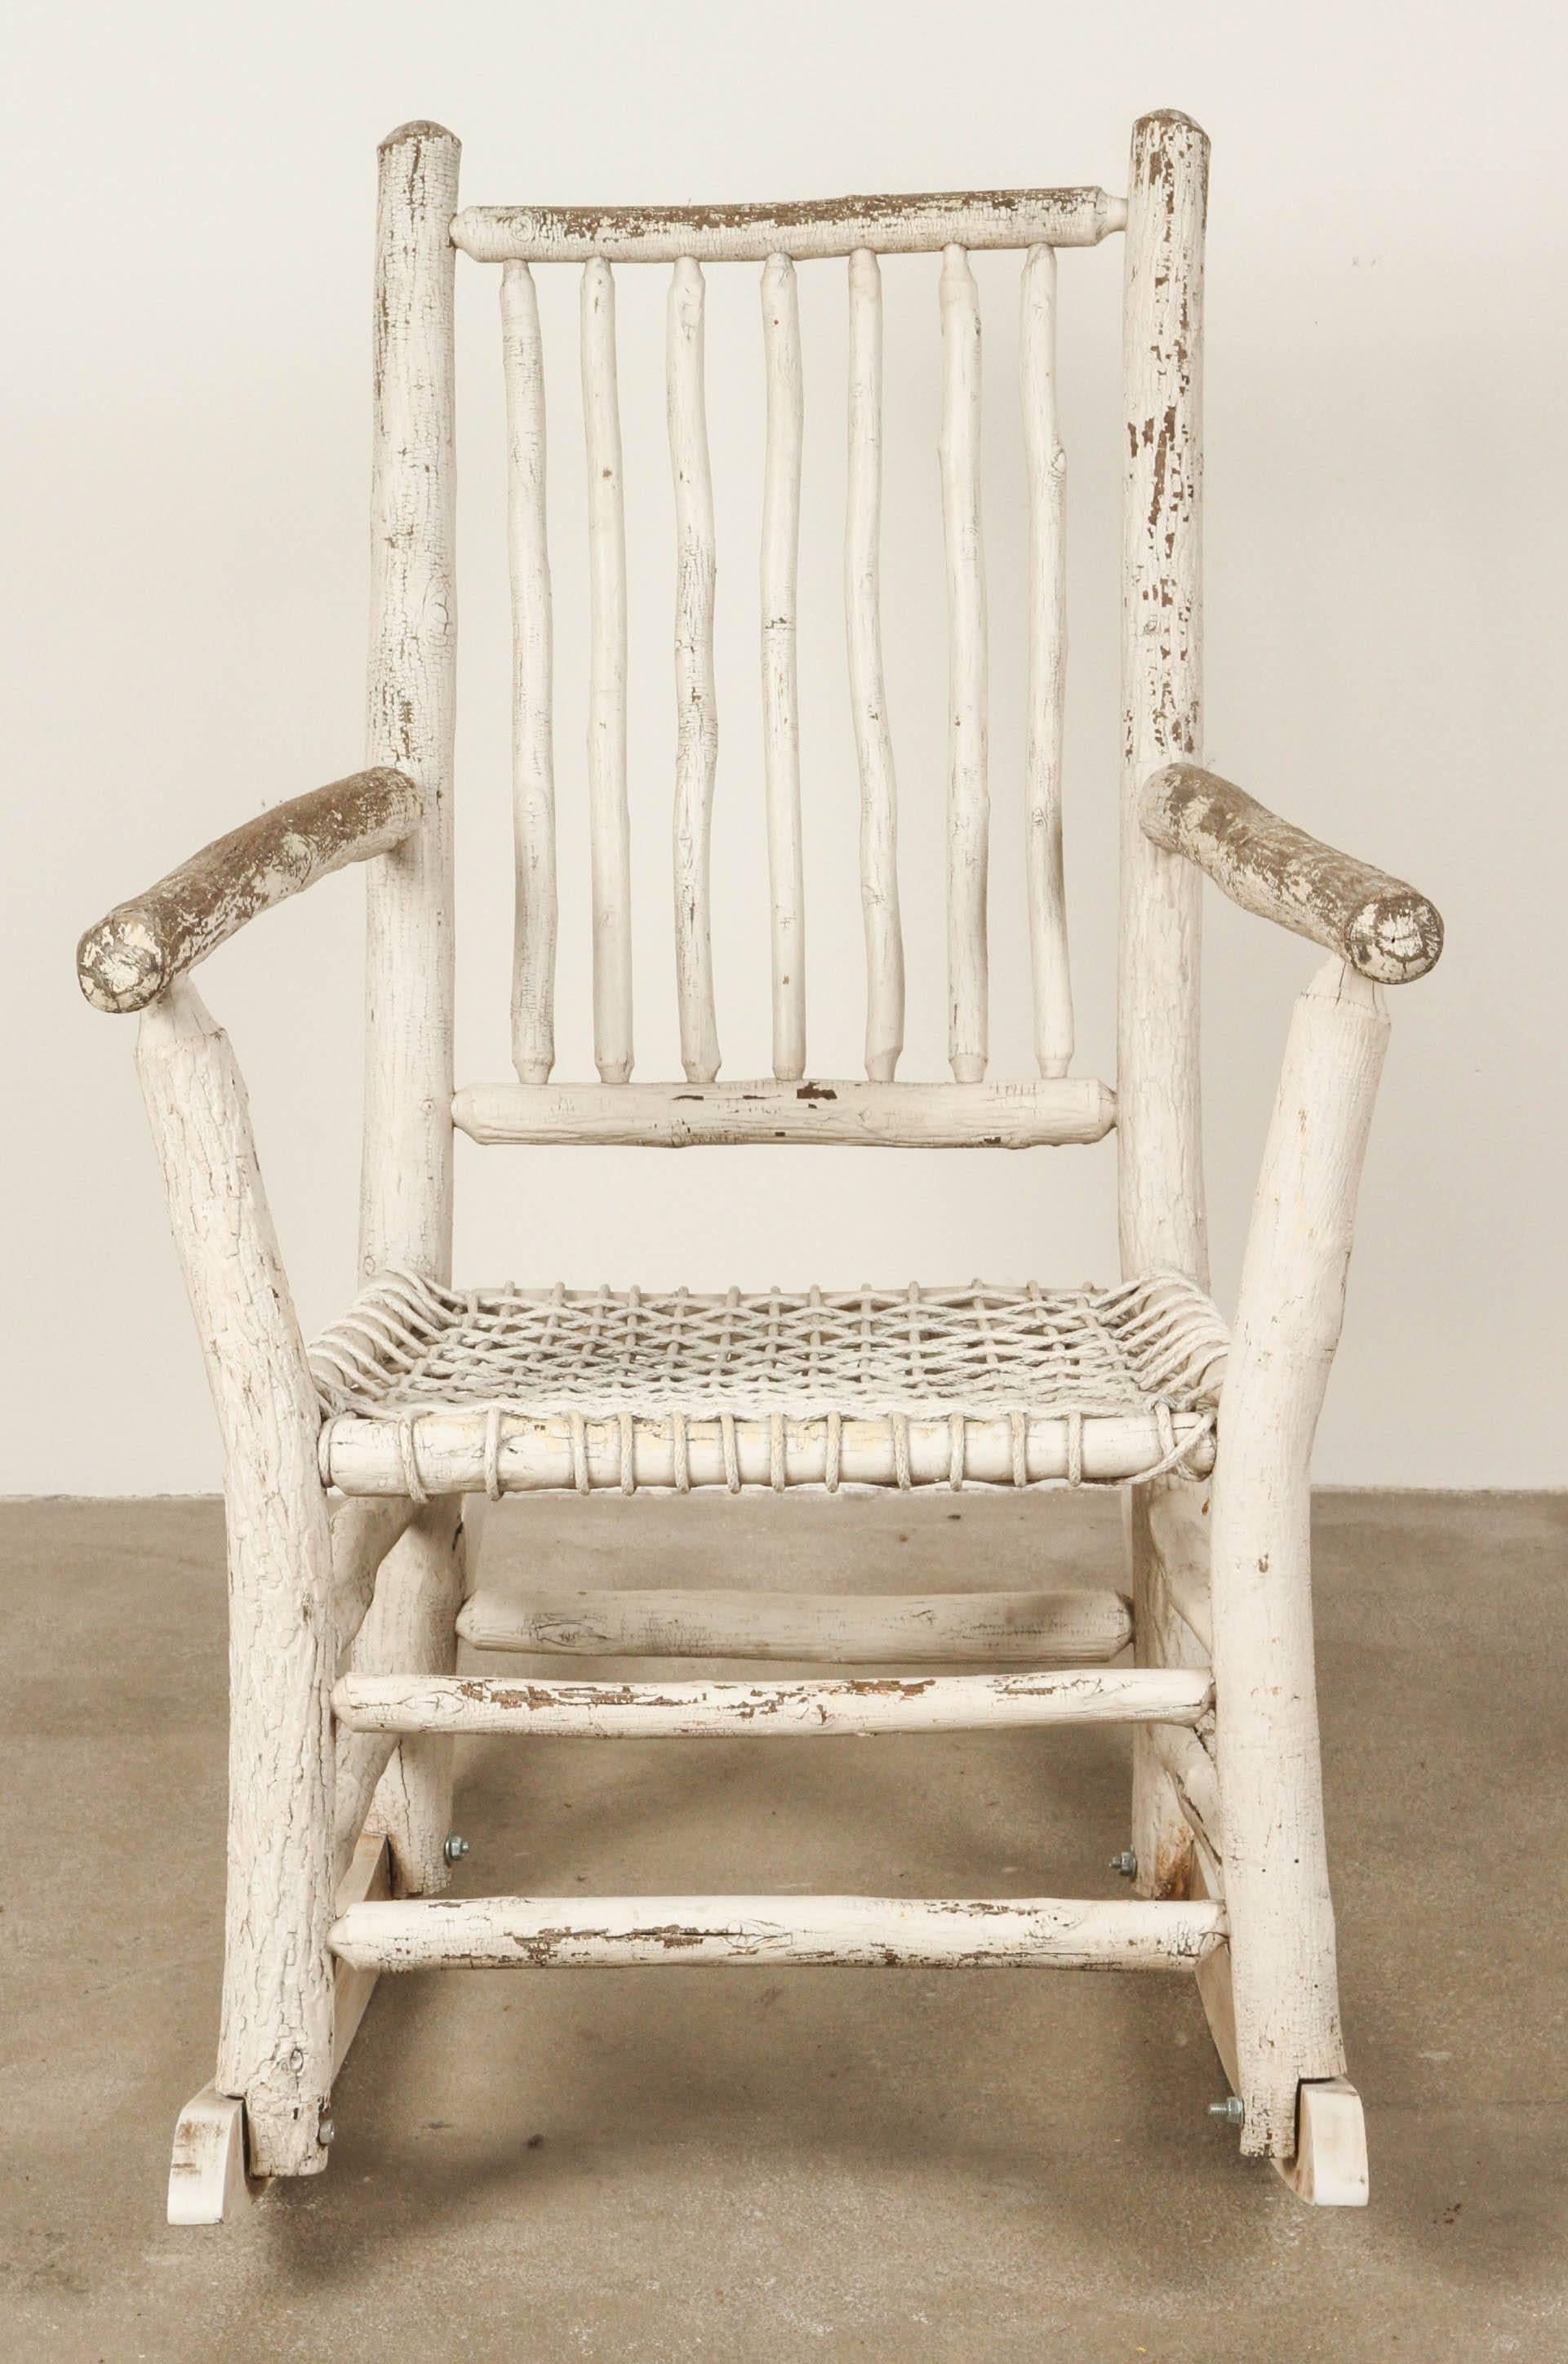 Log style rustic painted rocking chair.